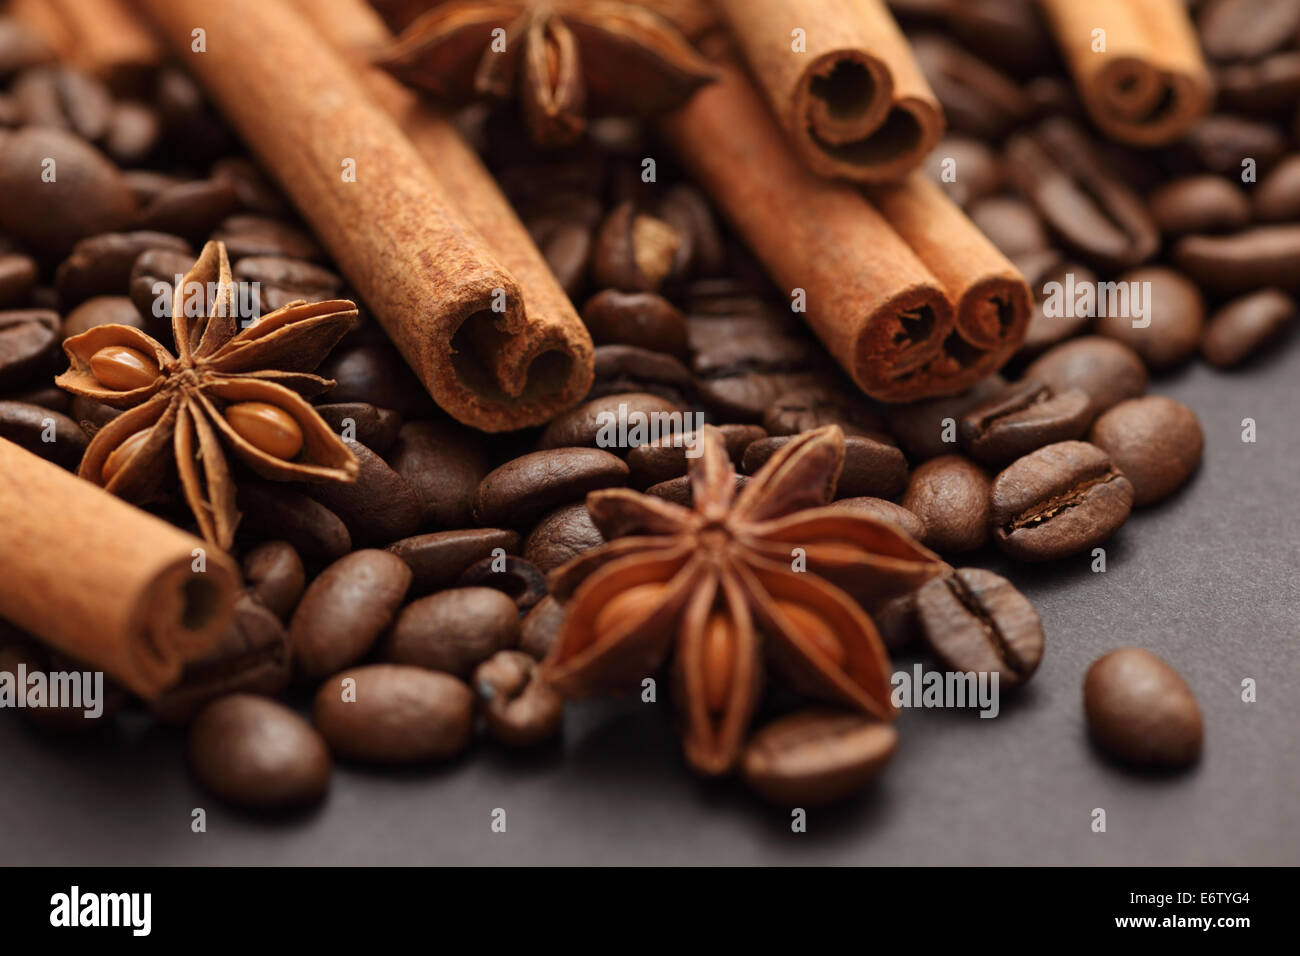 Cinnamon sticks, star anise and coffee beans. Black background. Close-up. Stock Photo